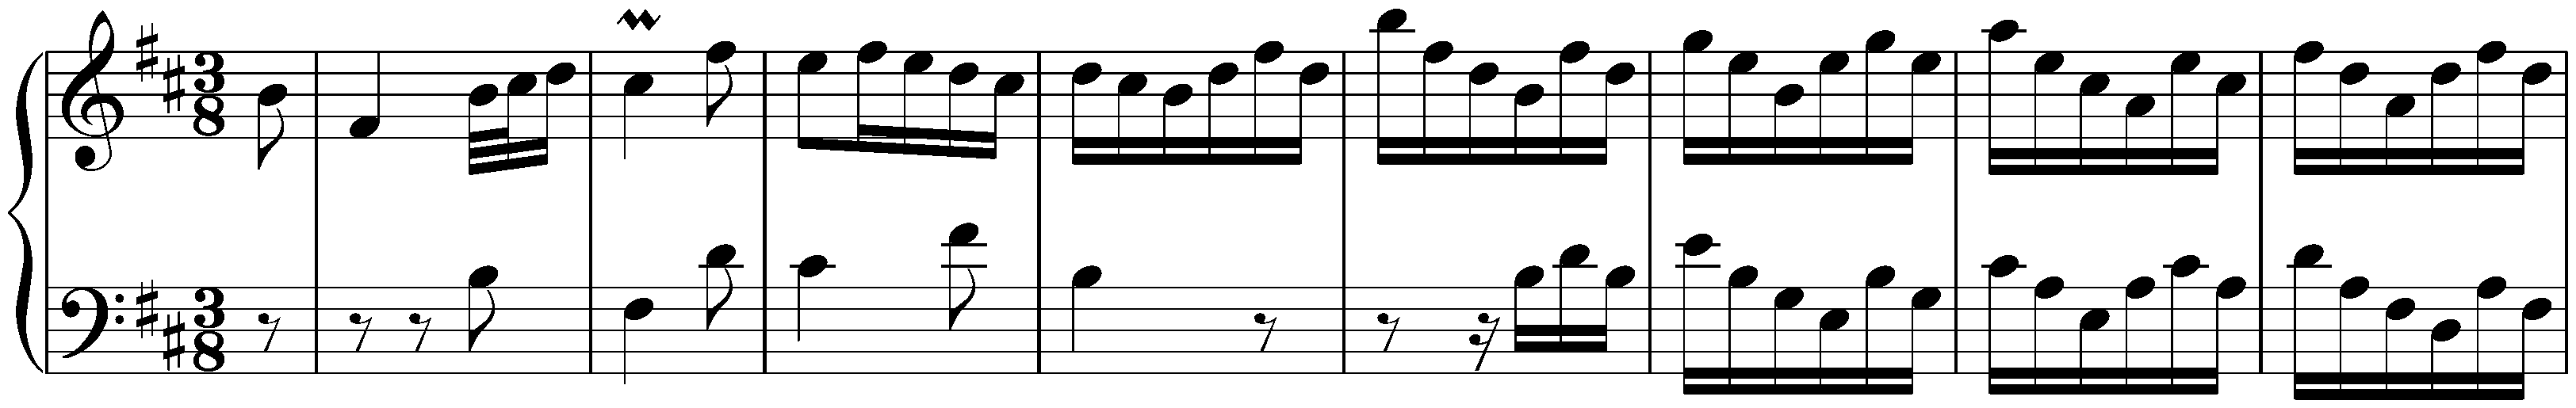 French Suite no. 3 in B minor, BWV 814; 6. Gigue